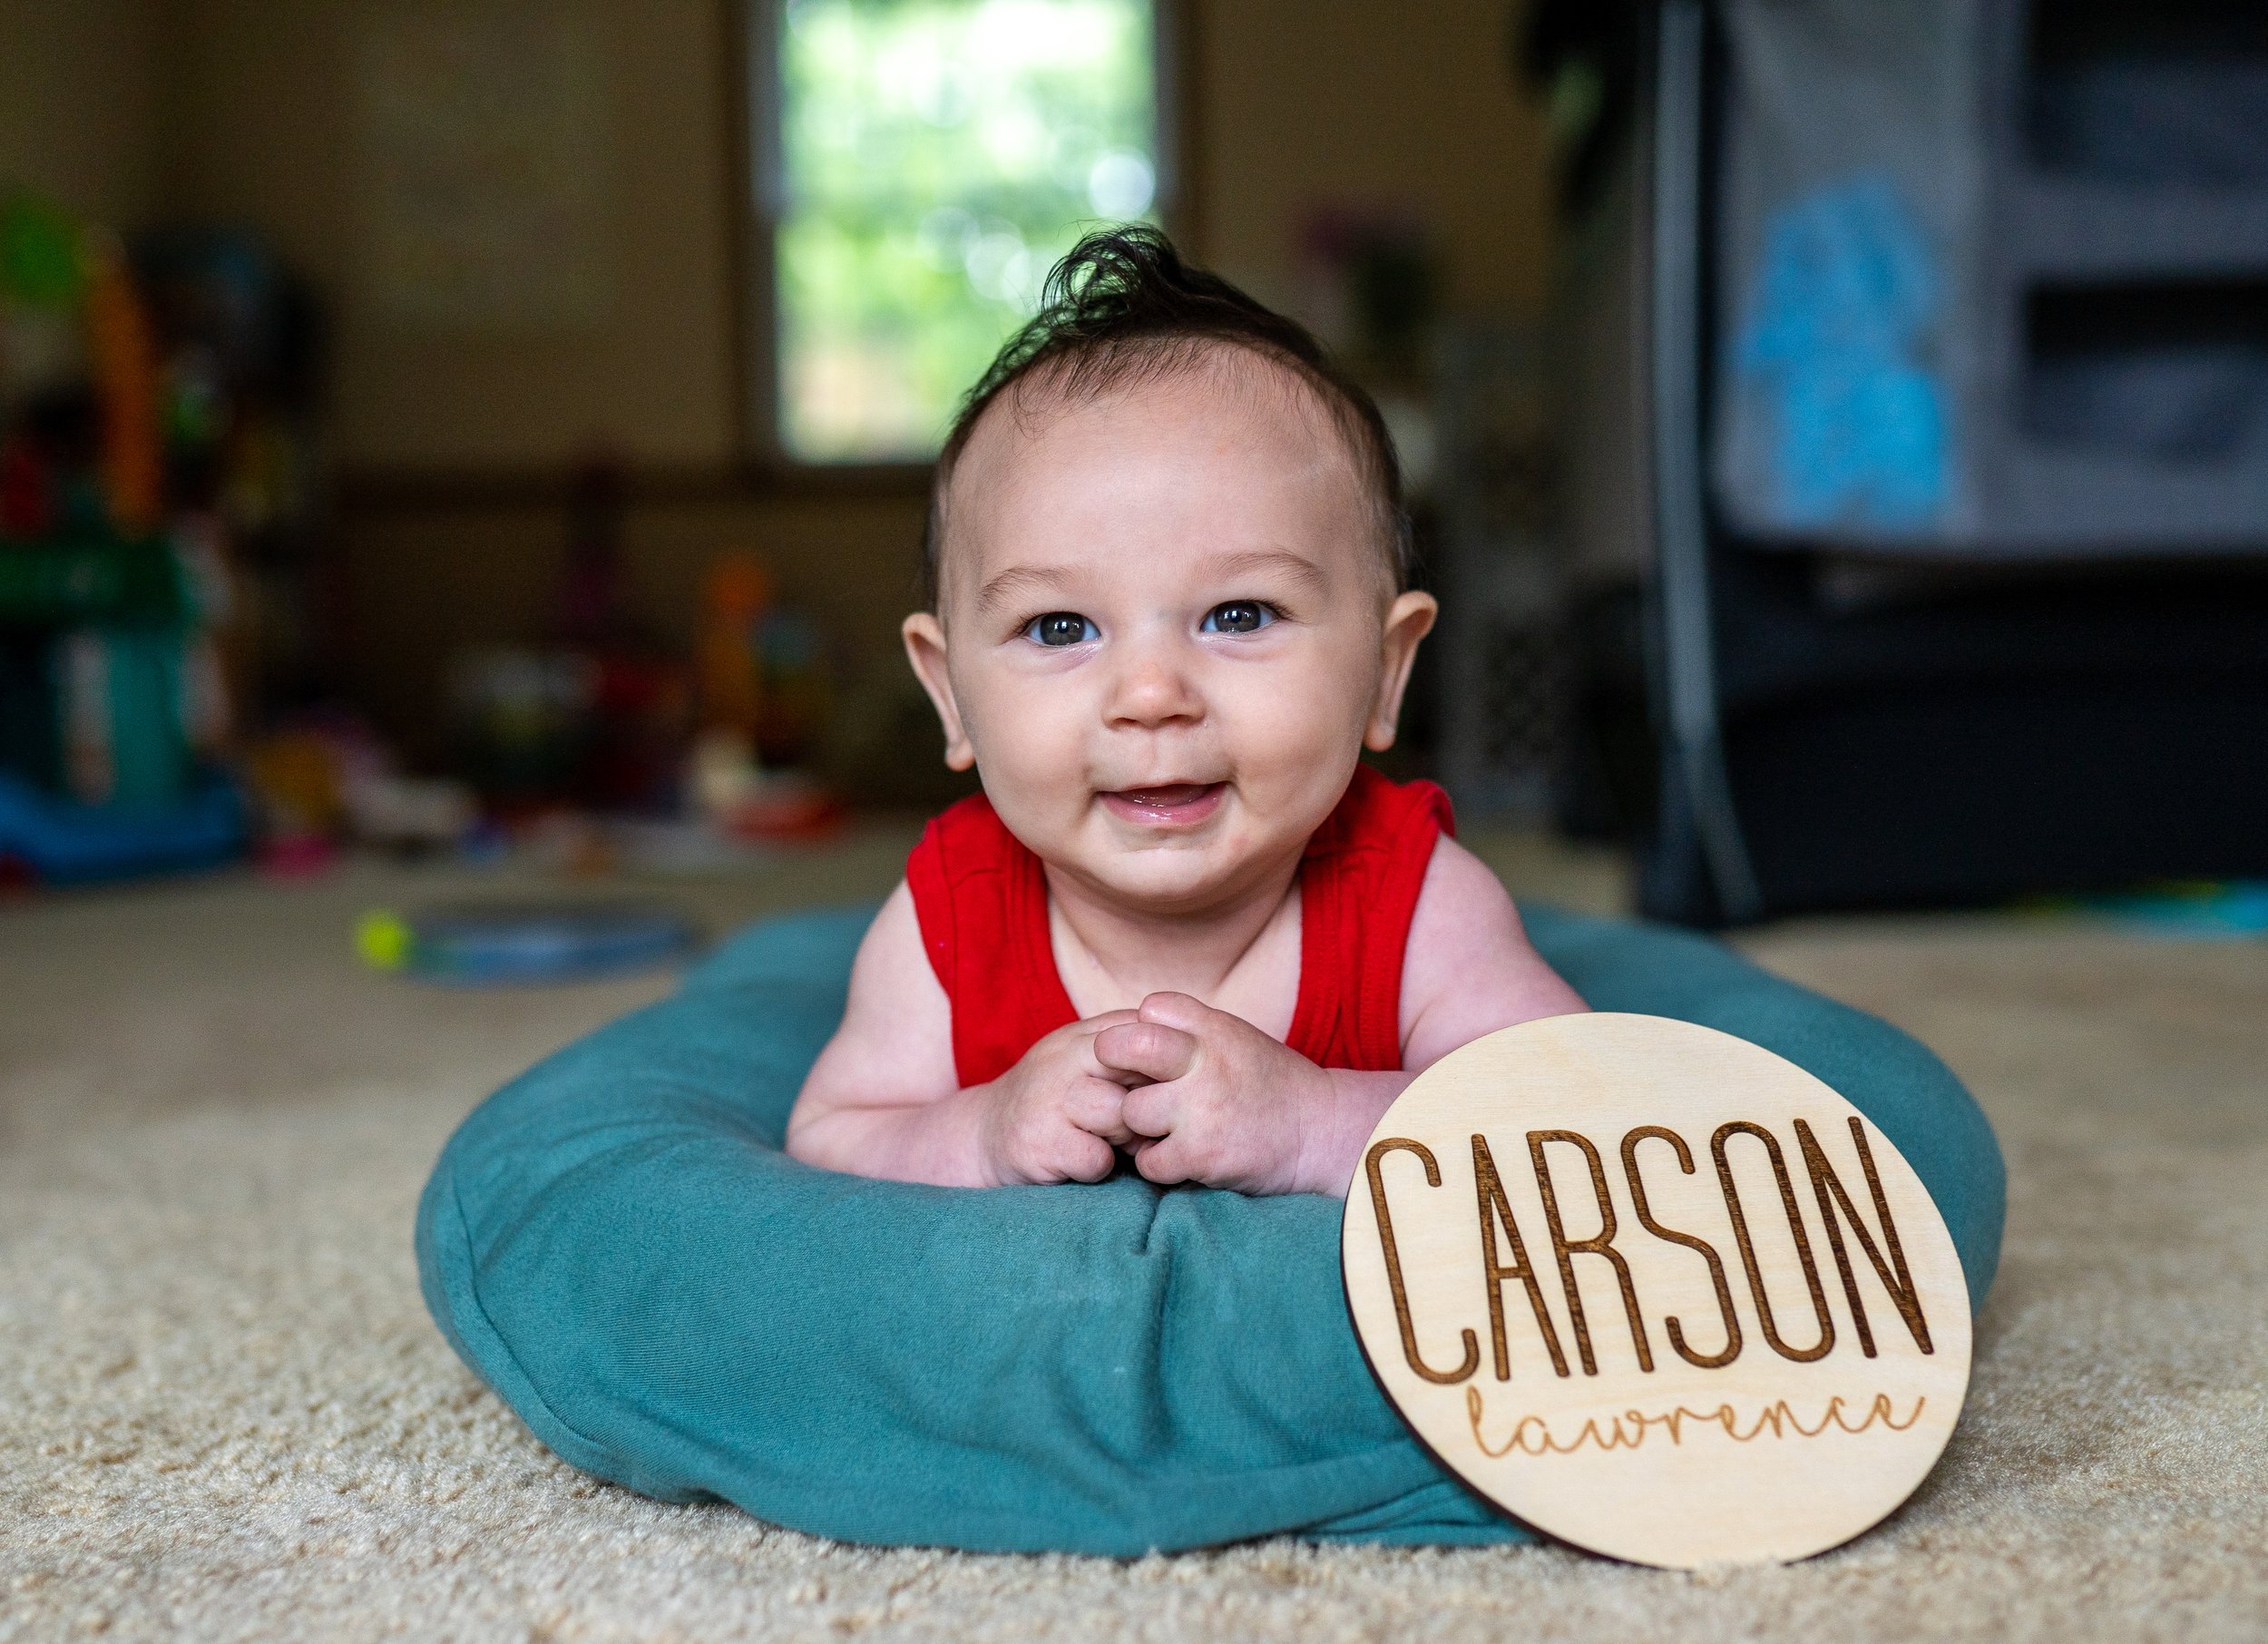 little boy on pillow looking at the camera with a sign that says carson lawrence next to him Happy 1st Birthday Boy